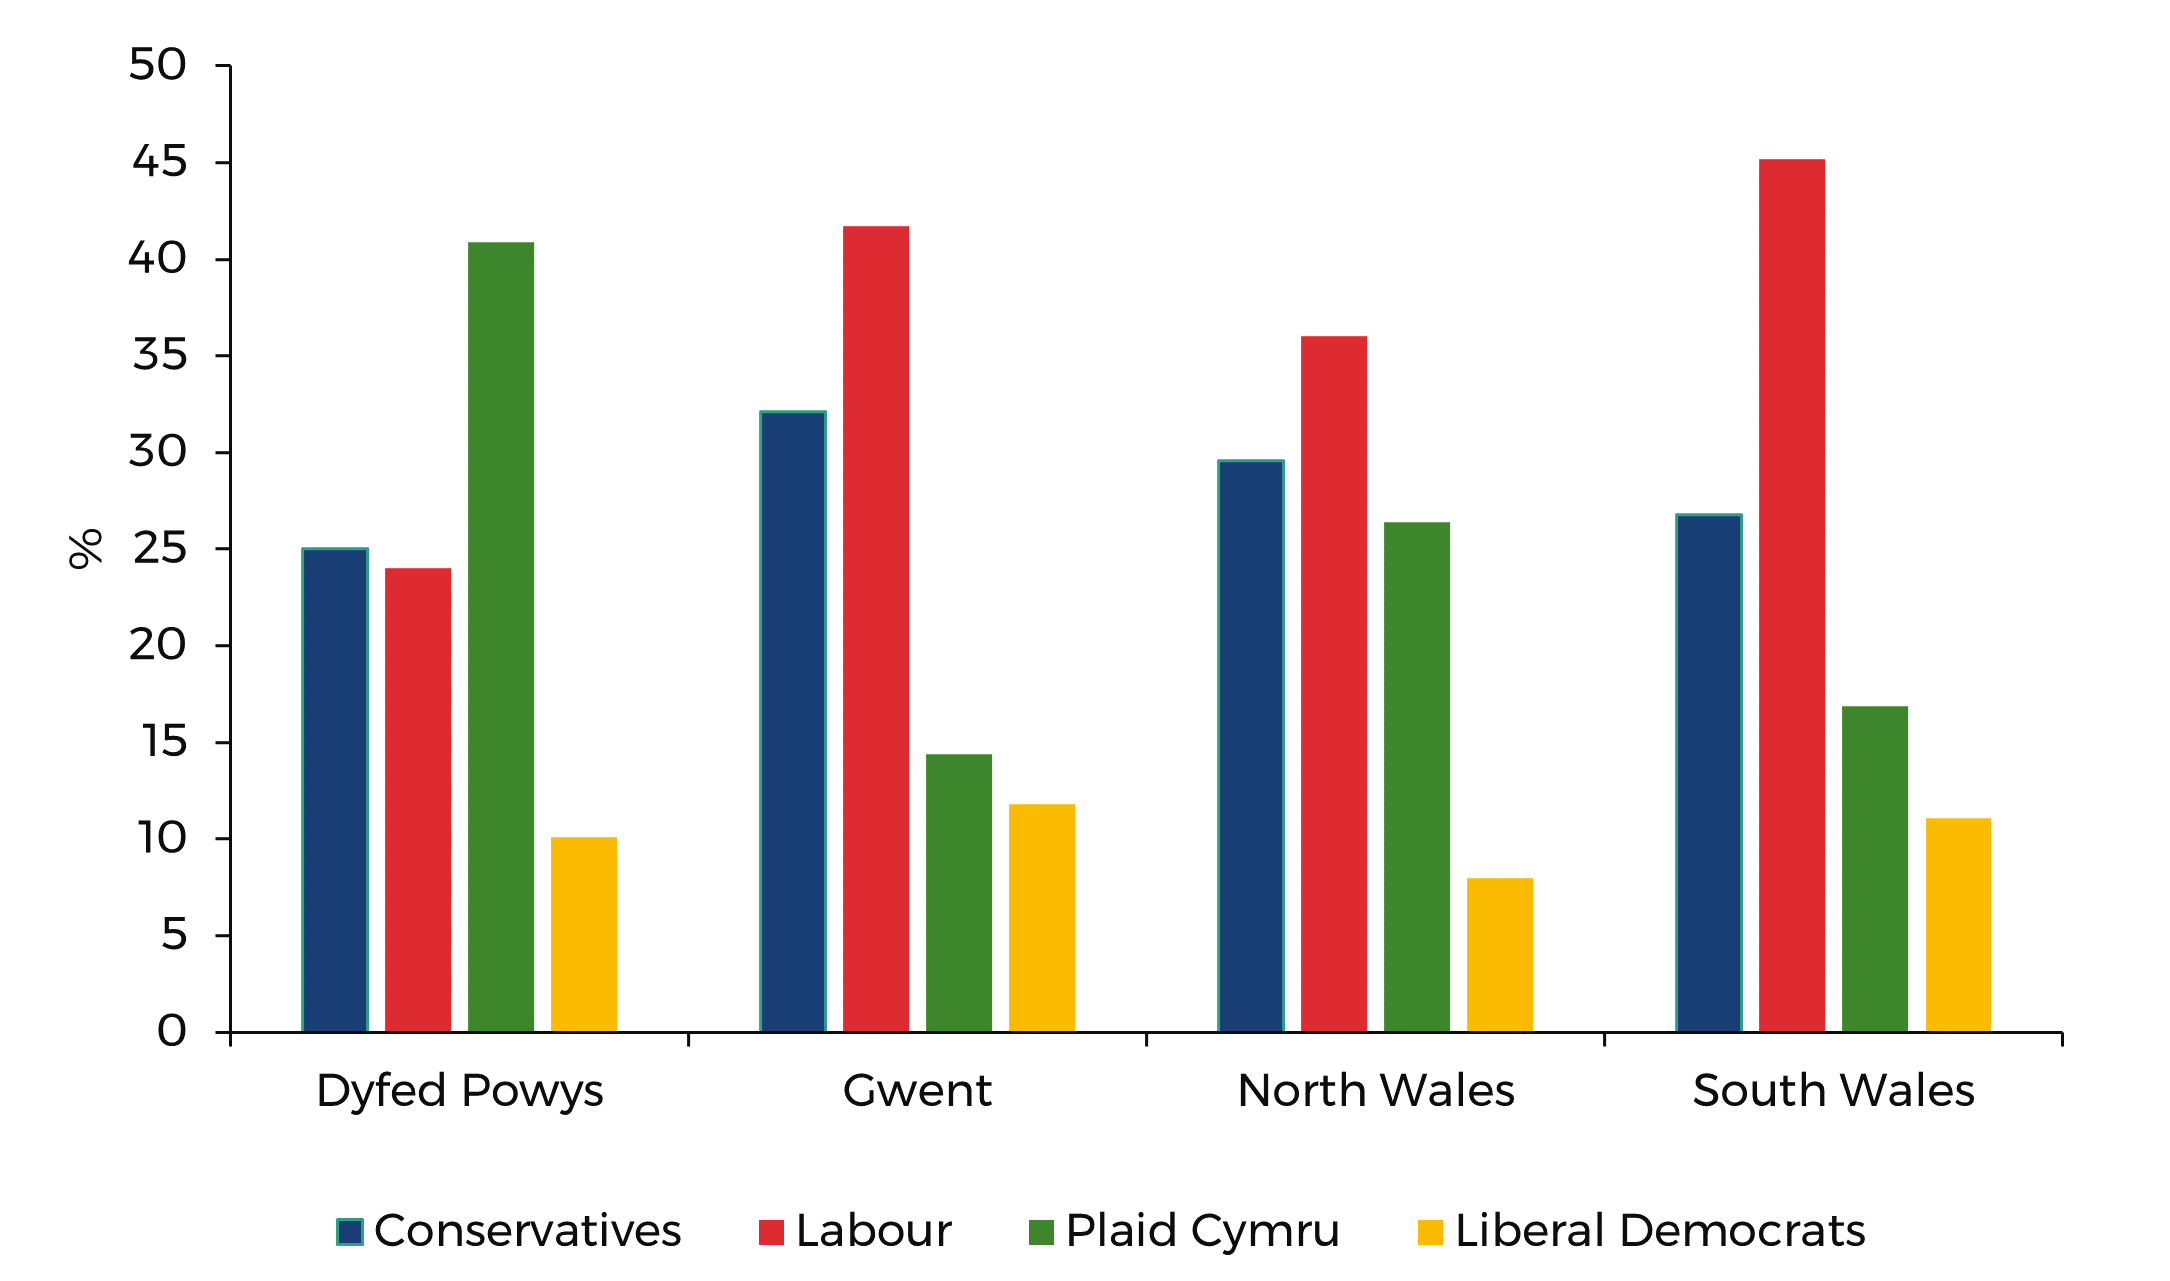 A graph showing how each of the four parties(Labour, Conservatives, Plaid Cymru and the Liberal Democrats) did in each police area in Wales. It shows that Plaid Cymru won in Dyfed Powys, with Labour winning in the other three police areas. It also shows that the Conservatives came second in all four police areas, and the Liberal Democrats fourth.